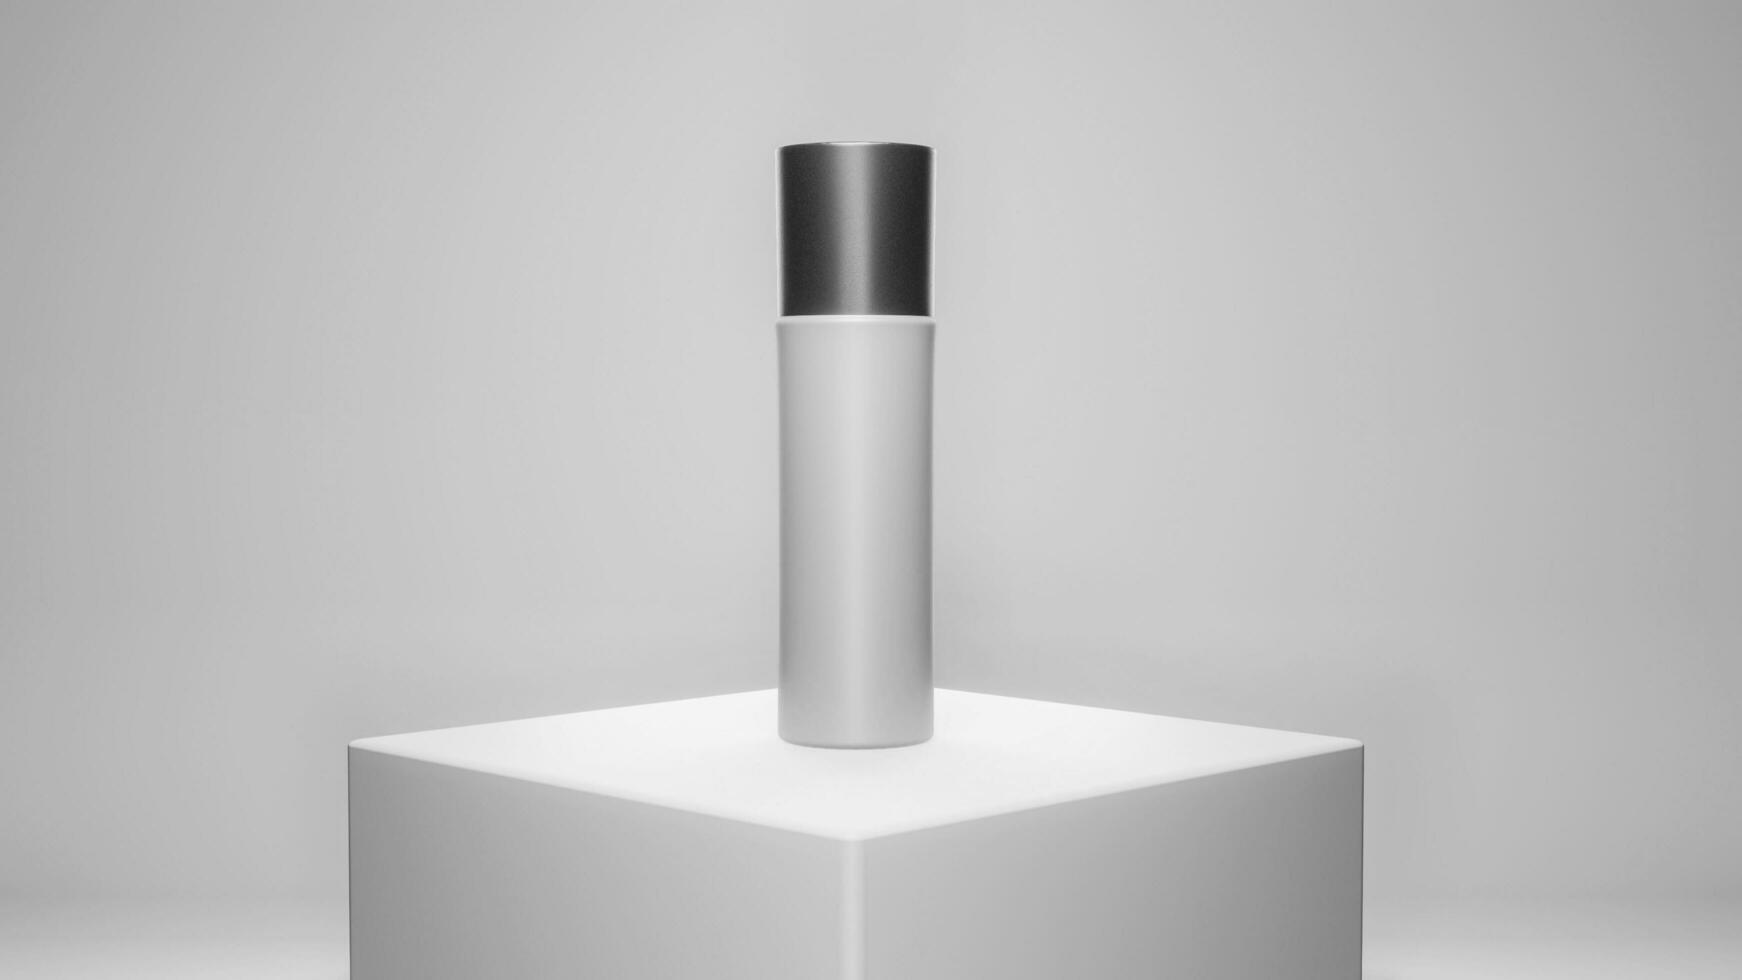 packaging spray cosmetic bottle on white background. Mockup for body spray or perfume bottle product 3d rendering. photo